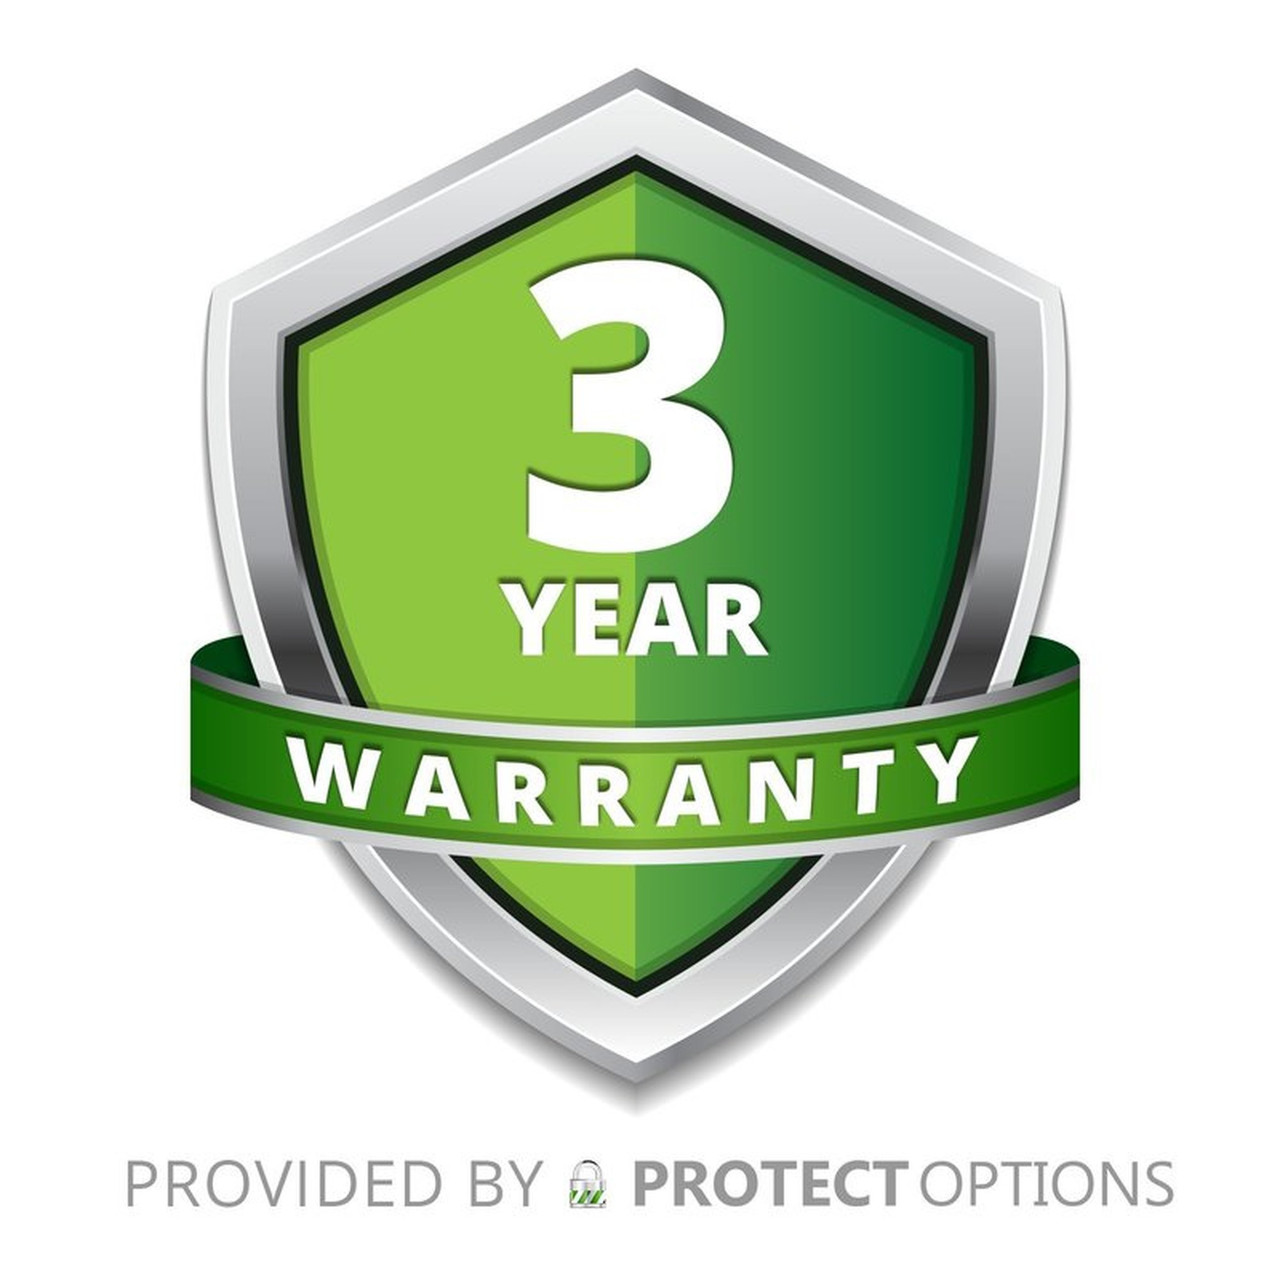 3 Year Warranty With Deductible - Laptops sale price of $2000-$2999.99